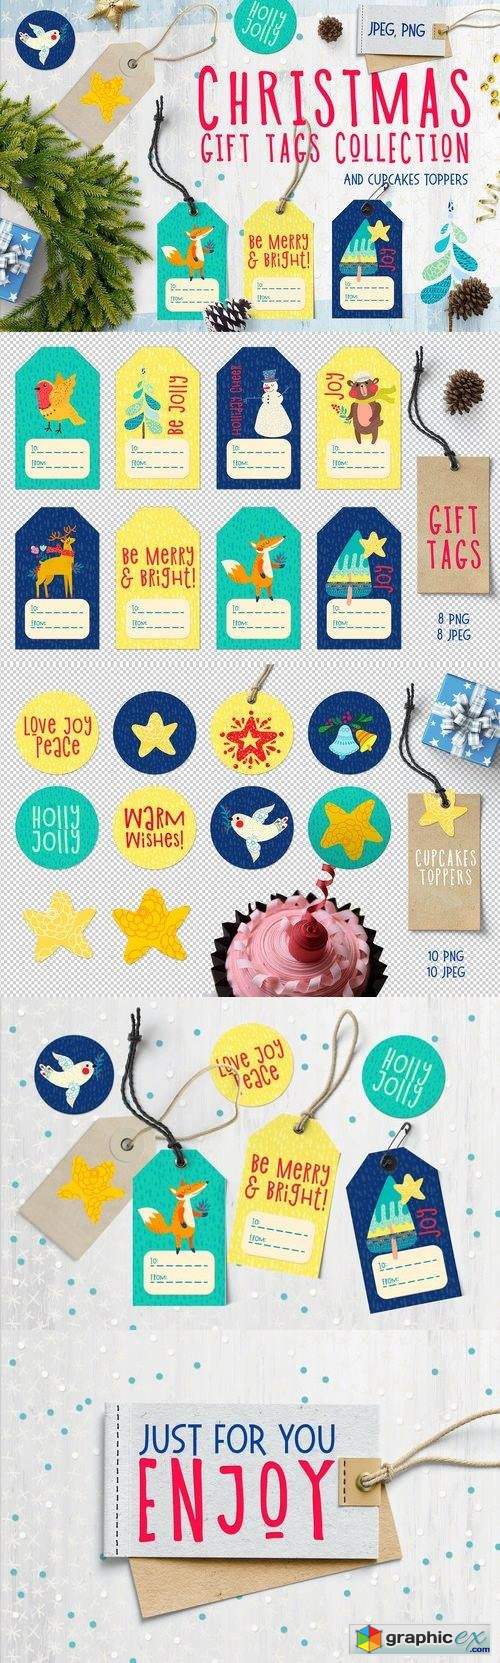 Christmas Gift Tag, cupcakes toppers 919611